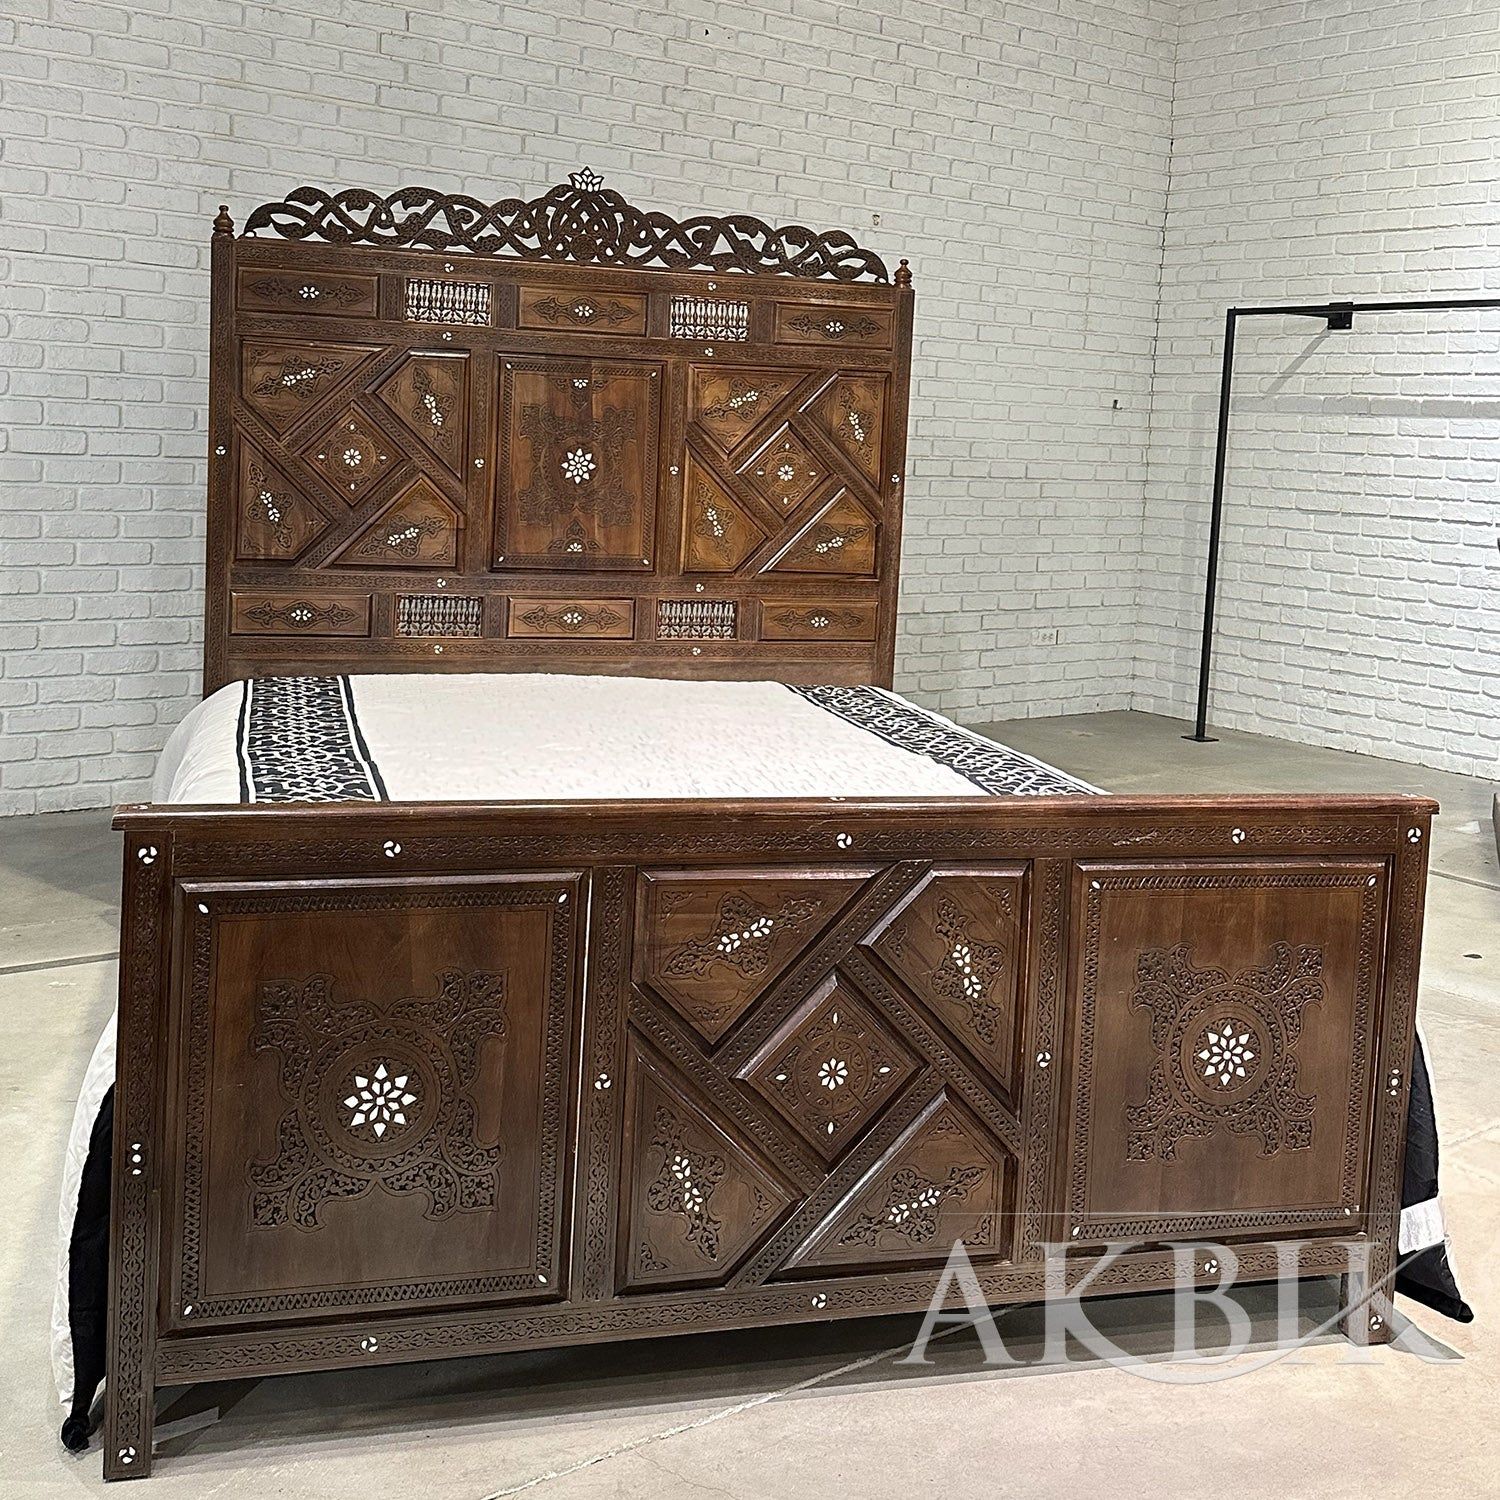 Documentary of Love Queen Size Bed - AKBIK Furniture & Design